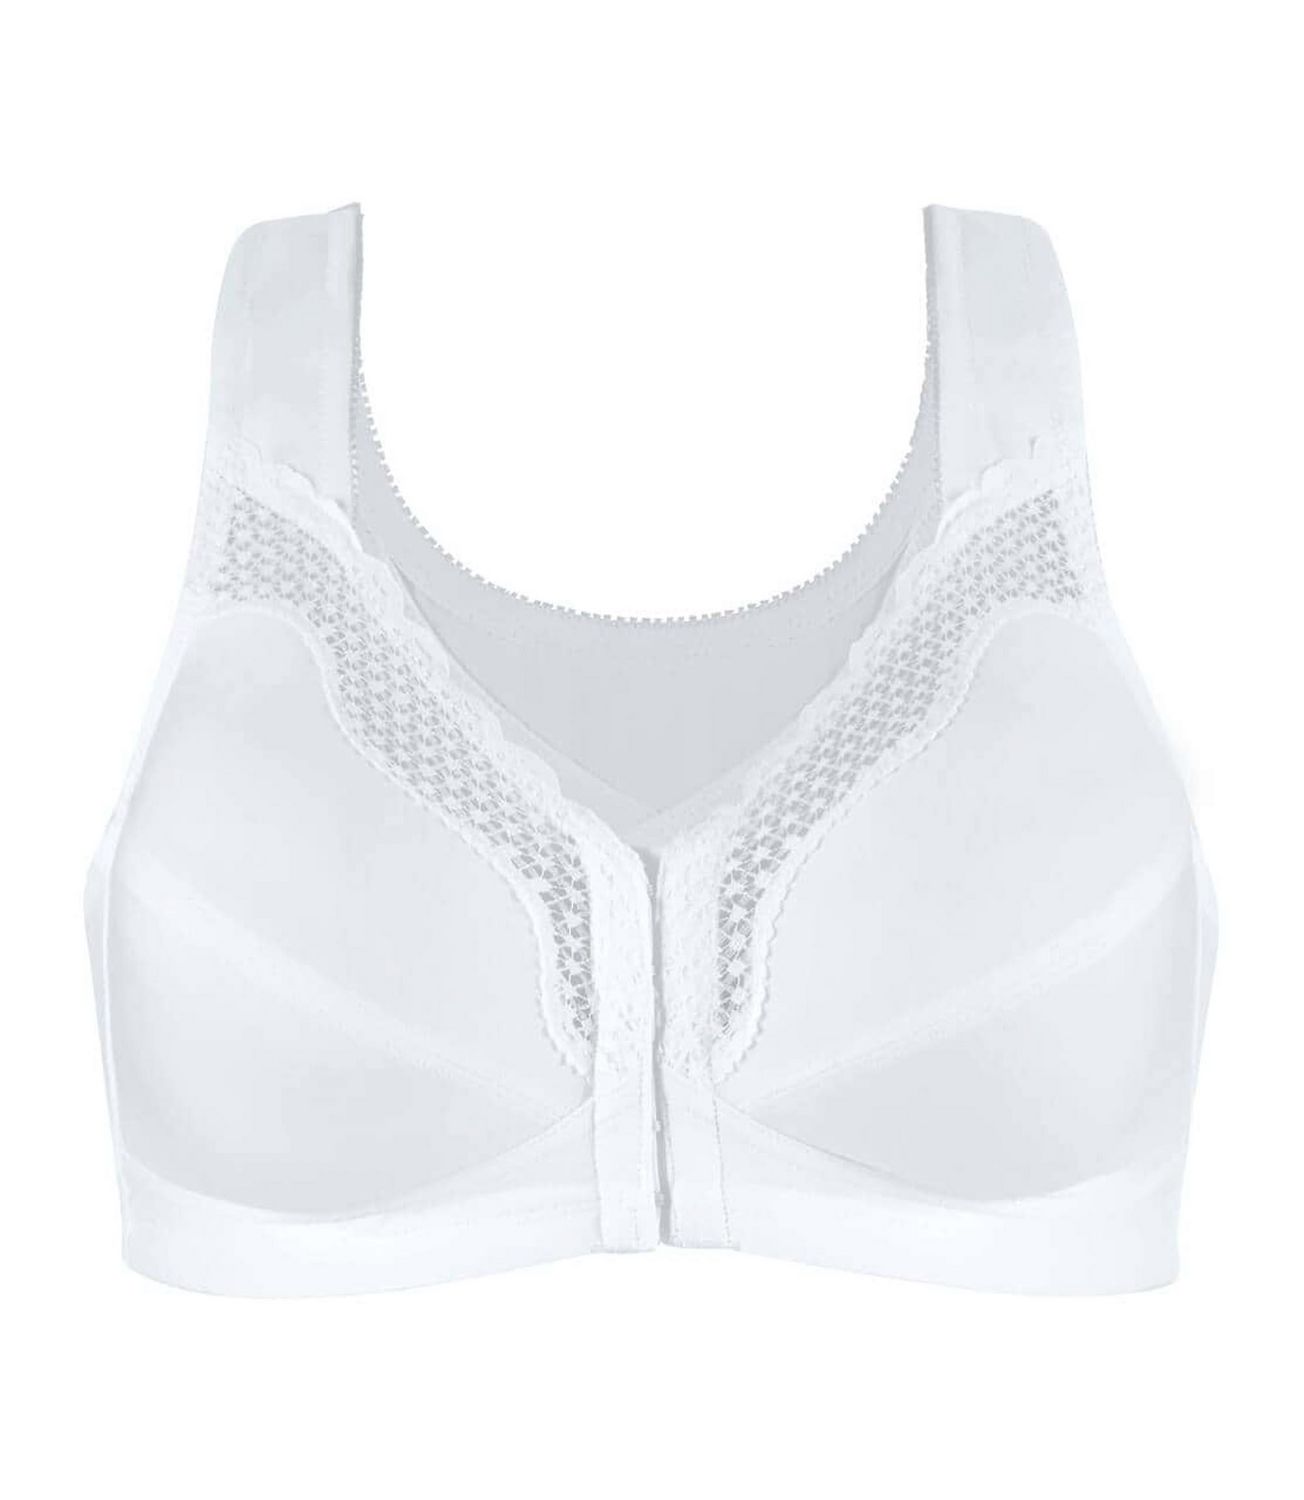 Vintage New Exquisite Form Moderate Control Body Briefer White 34C